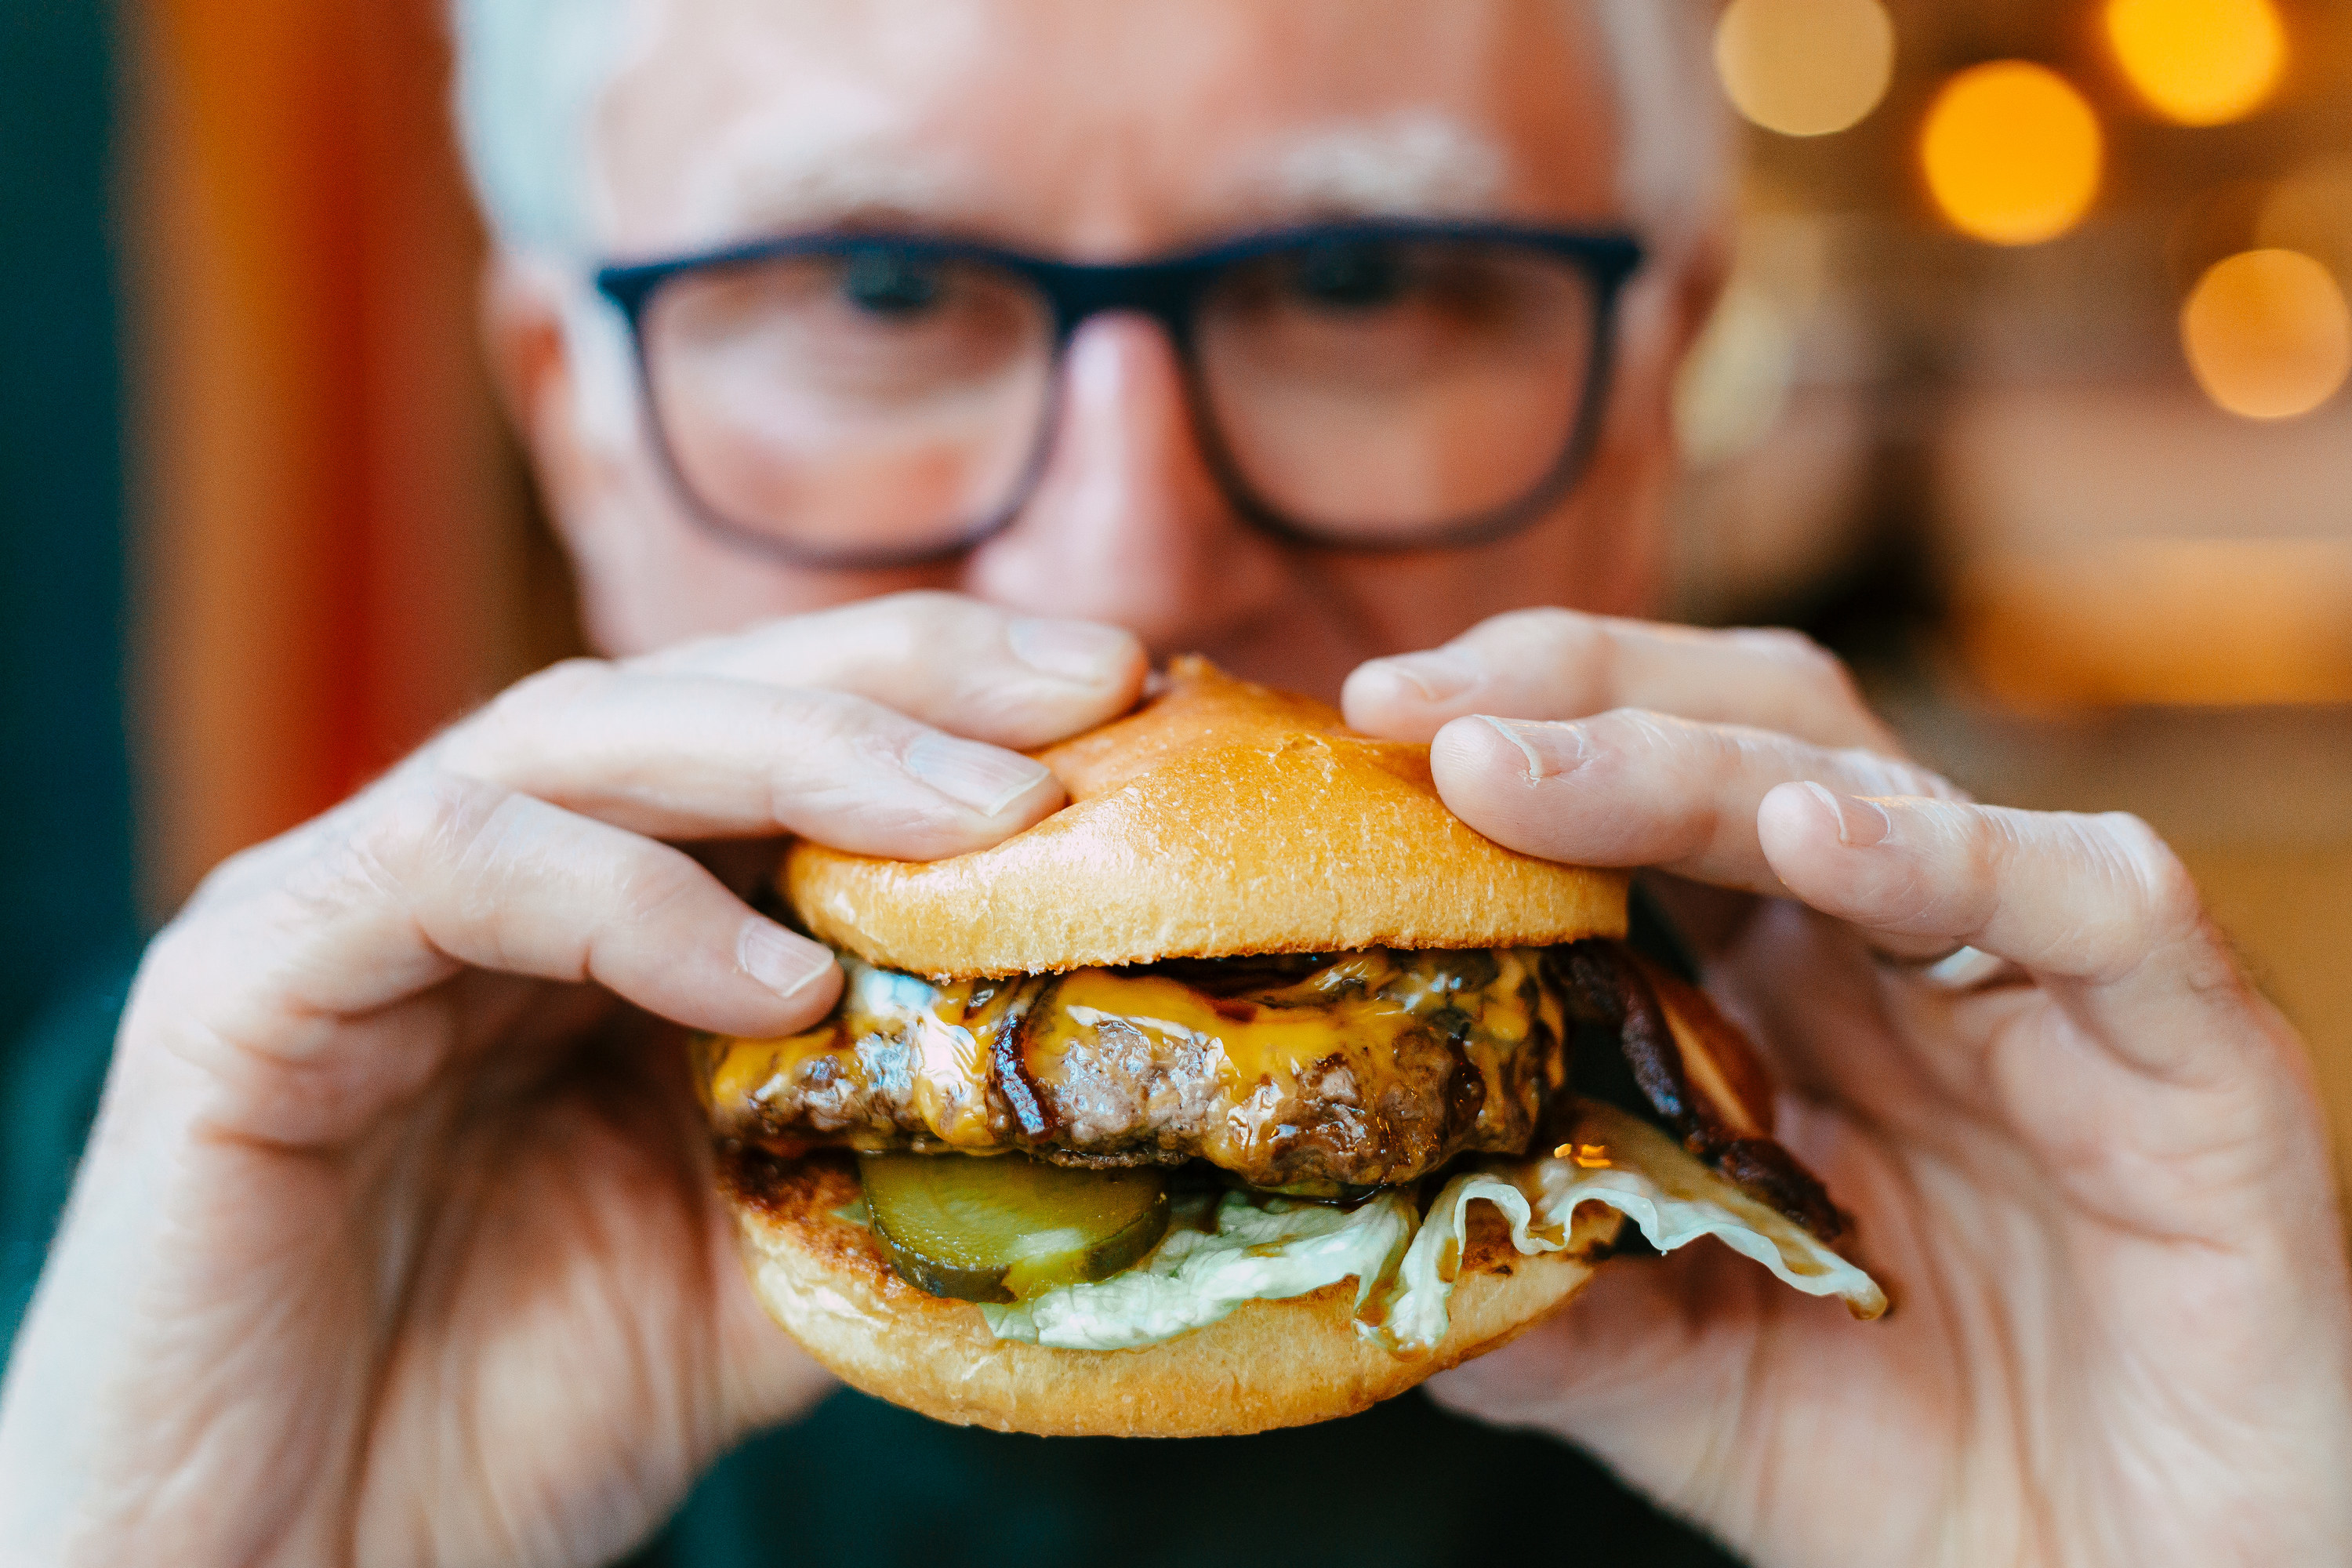 An image of an older man wearing glasses, holding a burger in front of him